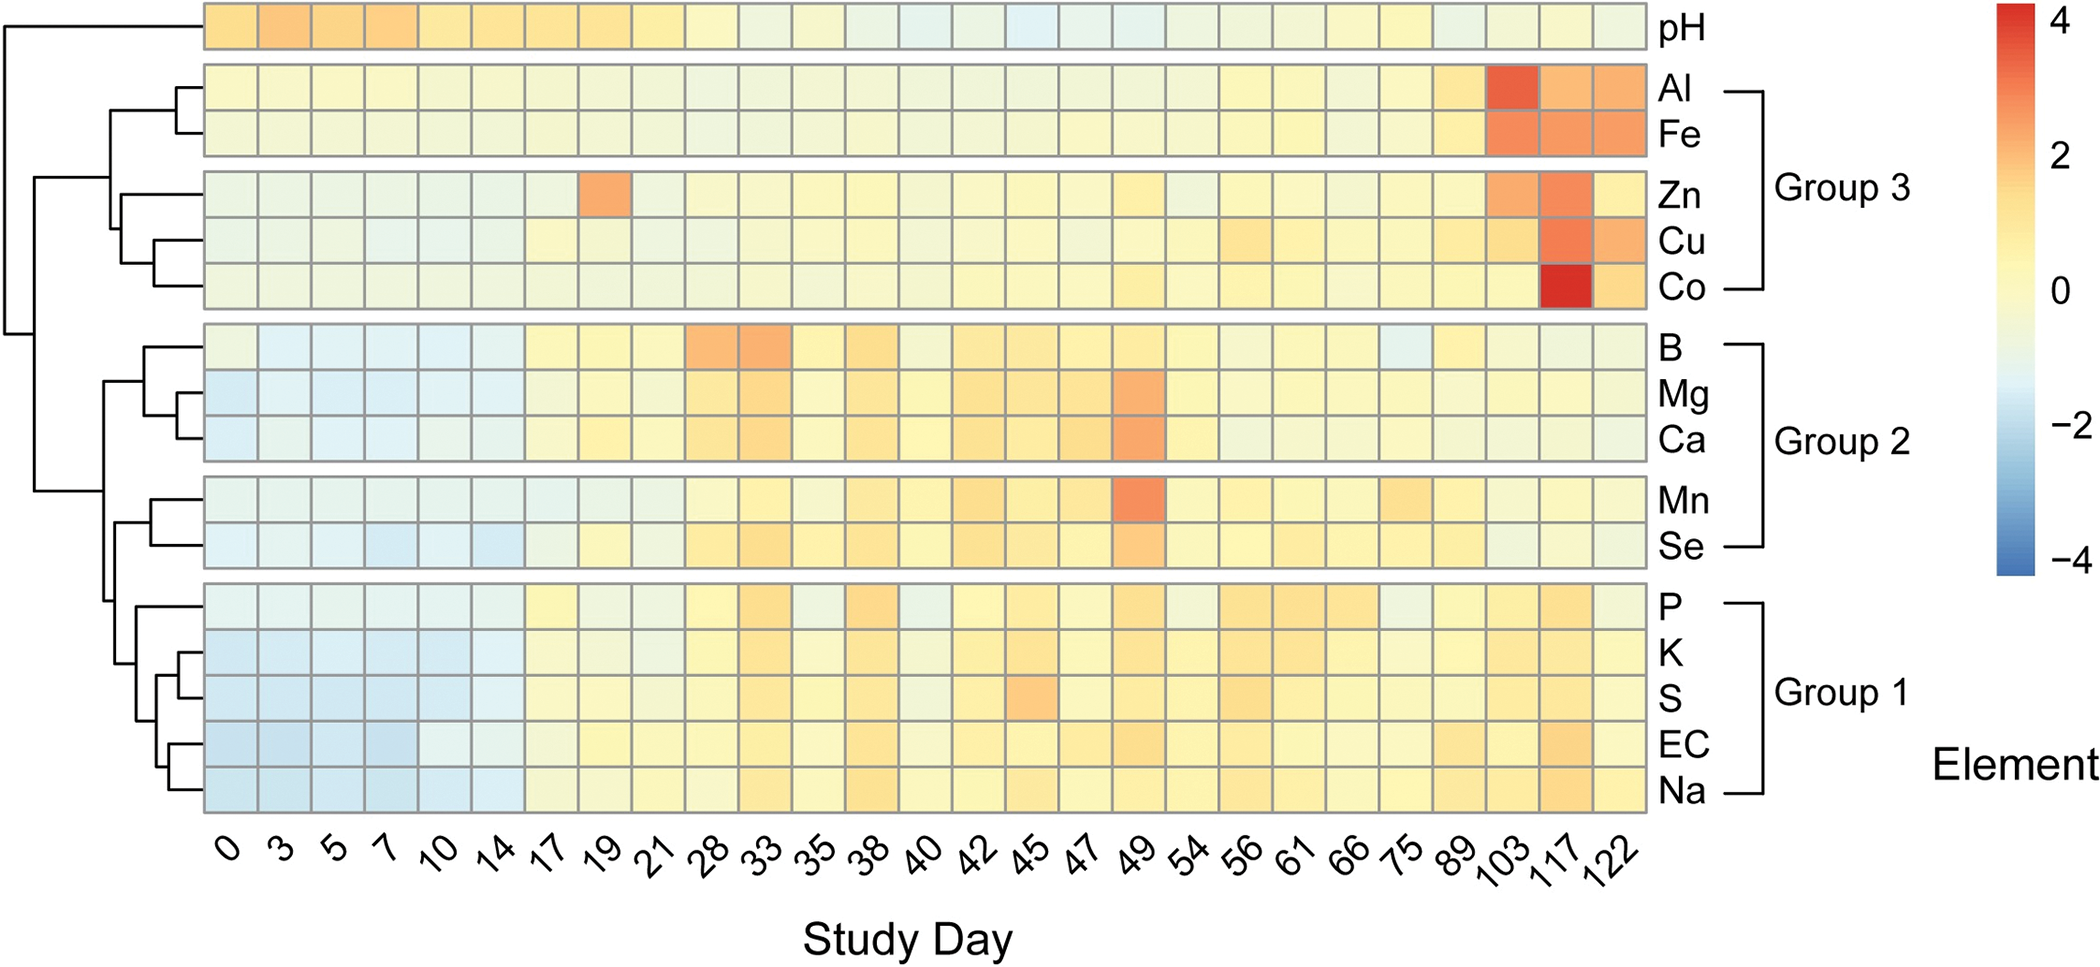 Fig 3. Heatmap showing scaled changes in elemental concentrations by study day. See the complete article at Plos One